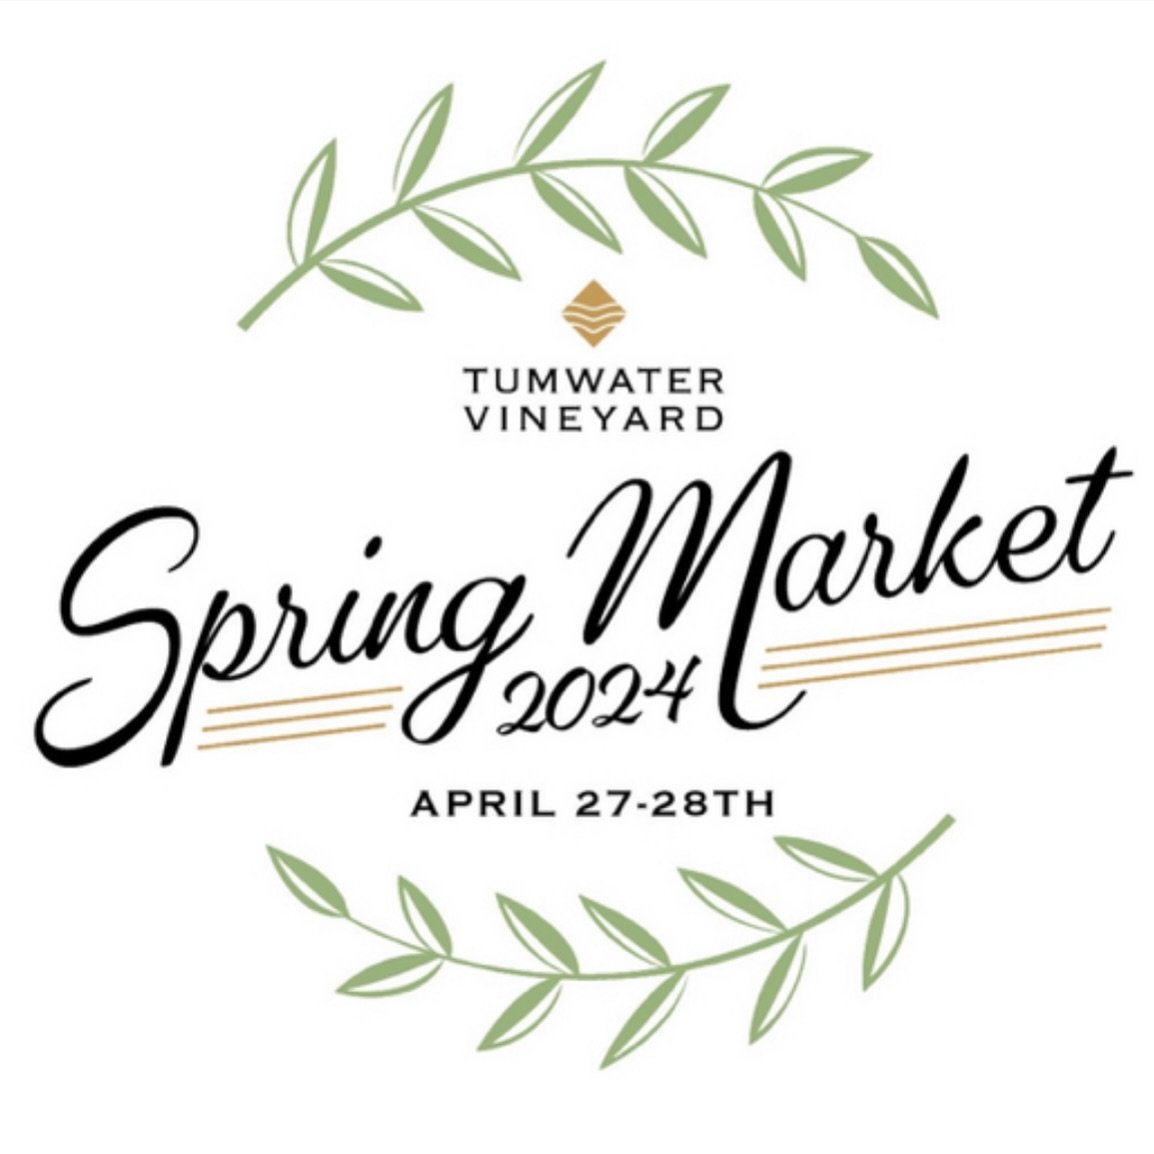 We hope that you will join us for one of the best events of the season! @tumwatervineyard has invited us to their Spring Market and you don&rsquo;t want to miss it friends. 

Come sip, shop and enjoy their beautiful vineyard views on April 27th &amp;